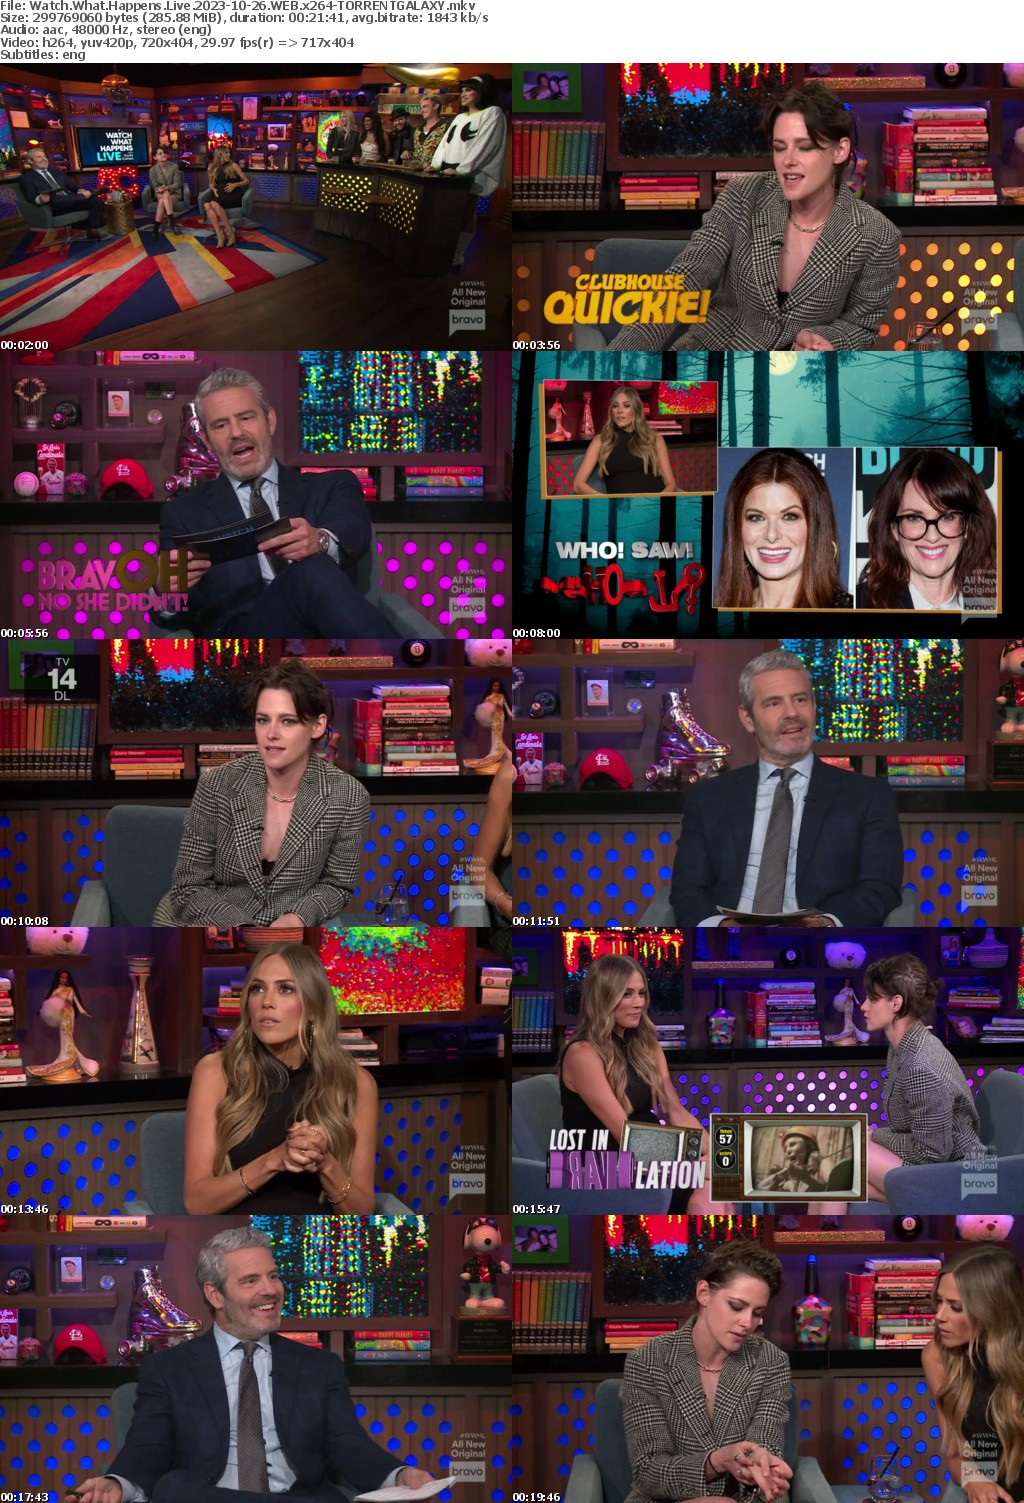 Watch What Happens Live 2023-10-26 WEB x264-GALAXY